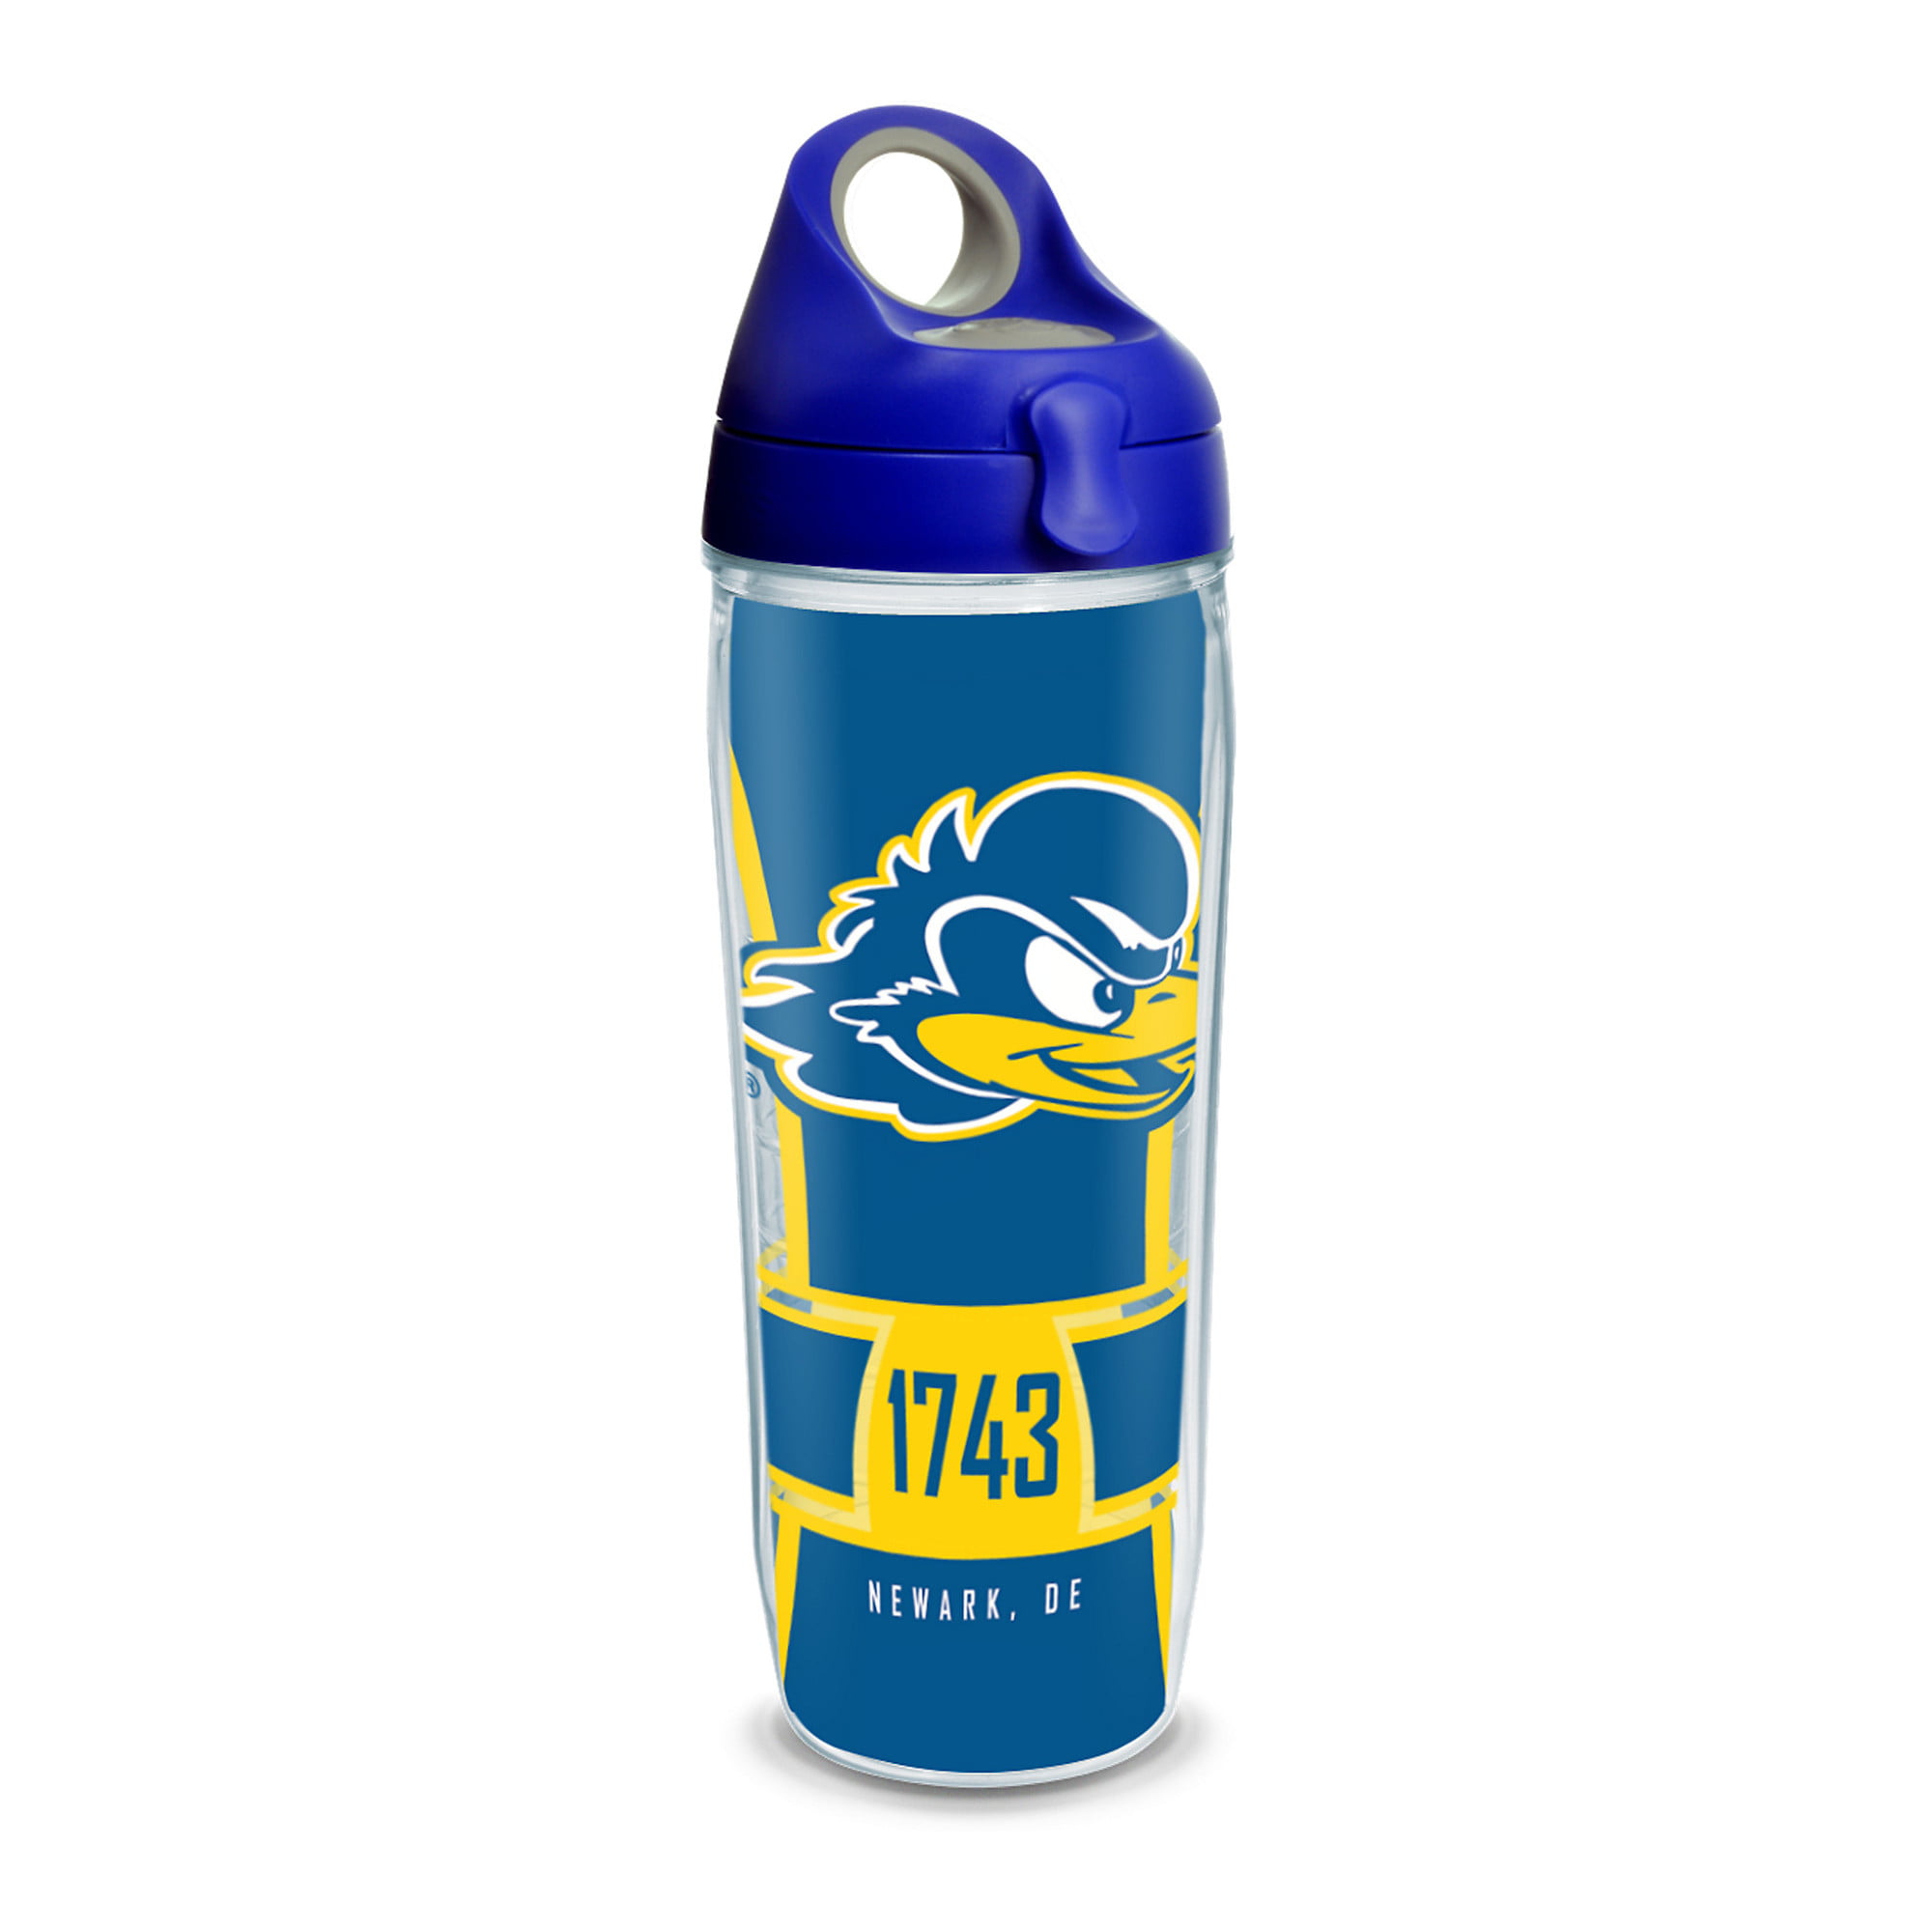 University of Delaware Tervis 24oz Insulated Travel Mug with Lid